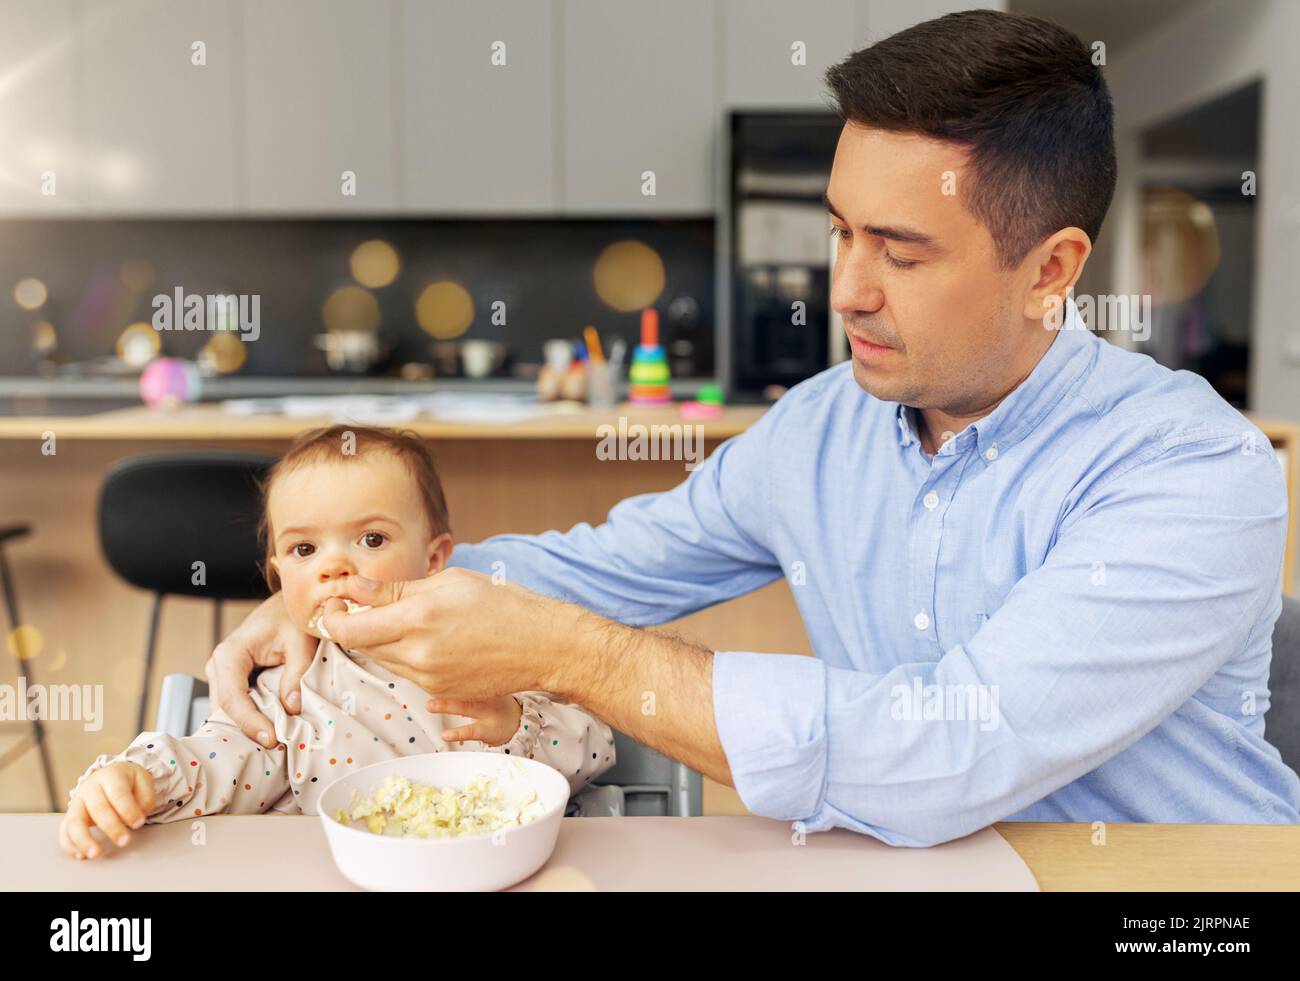 middle-aged father feeding baby daughter at home Stock Photo